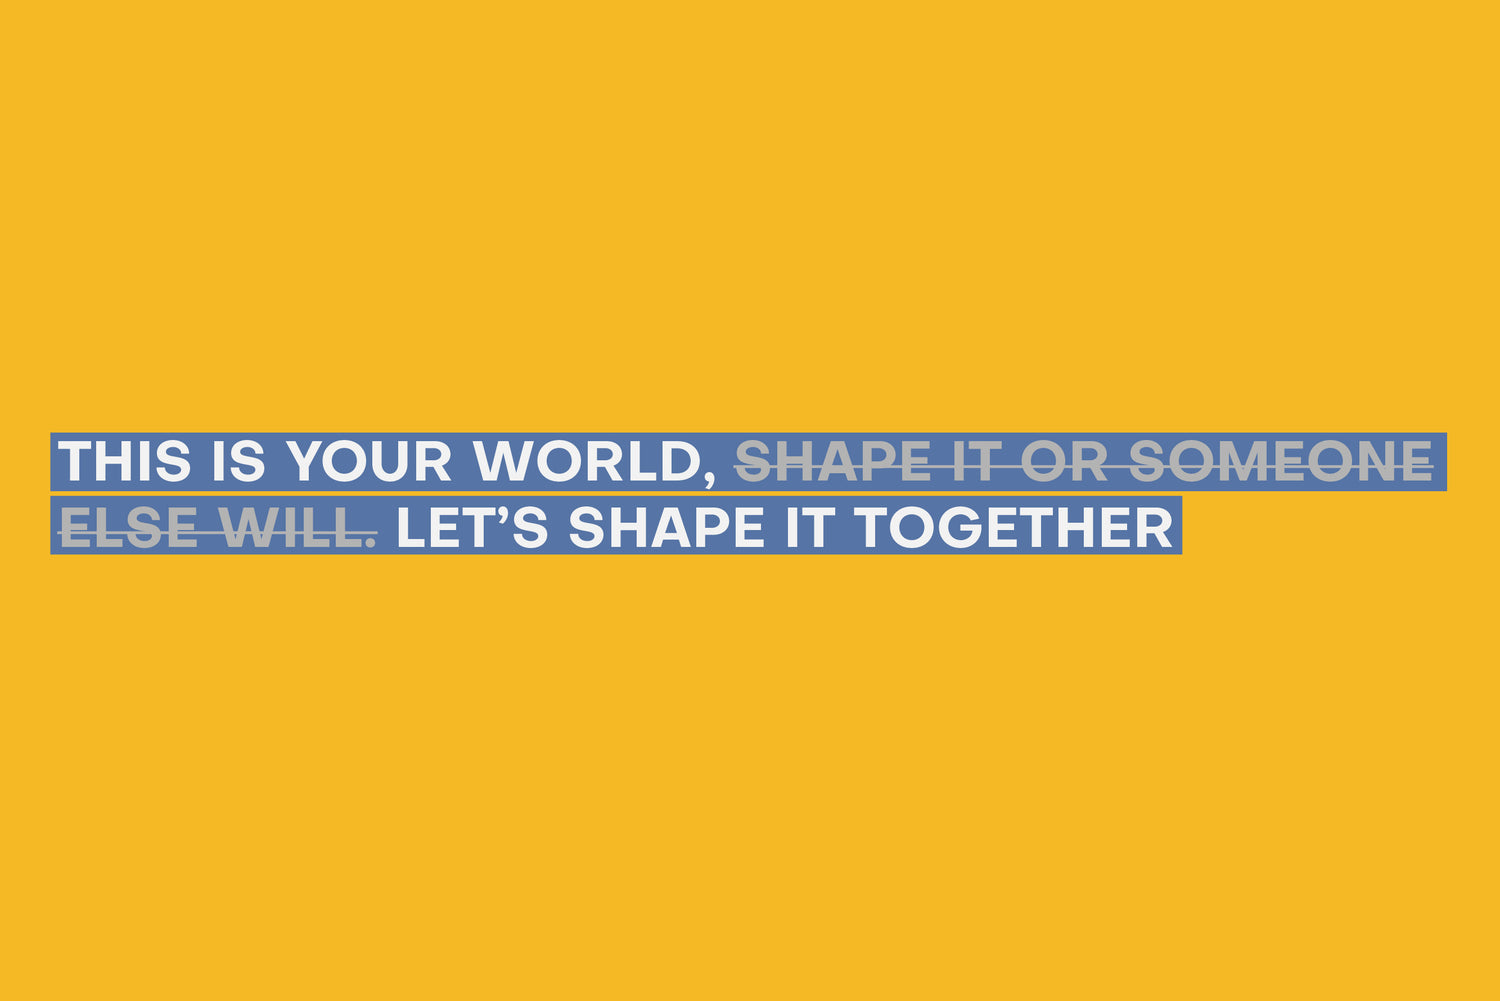 This is your world, let's shape it together